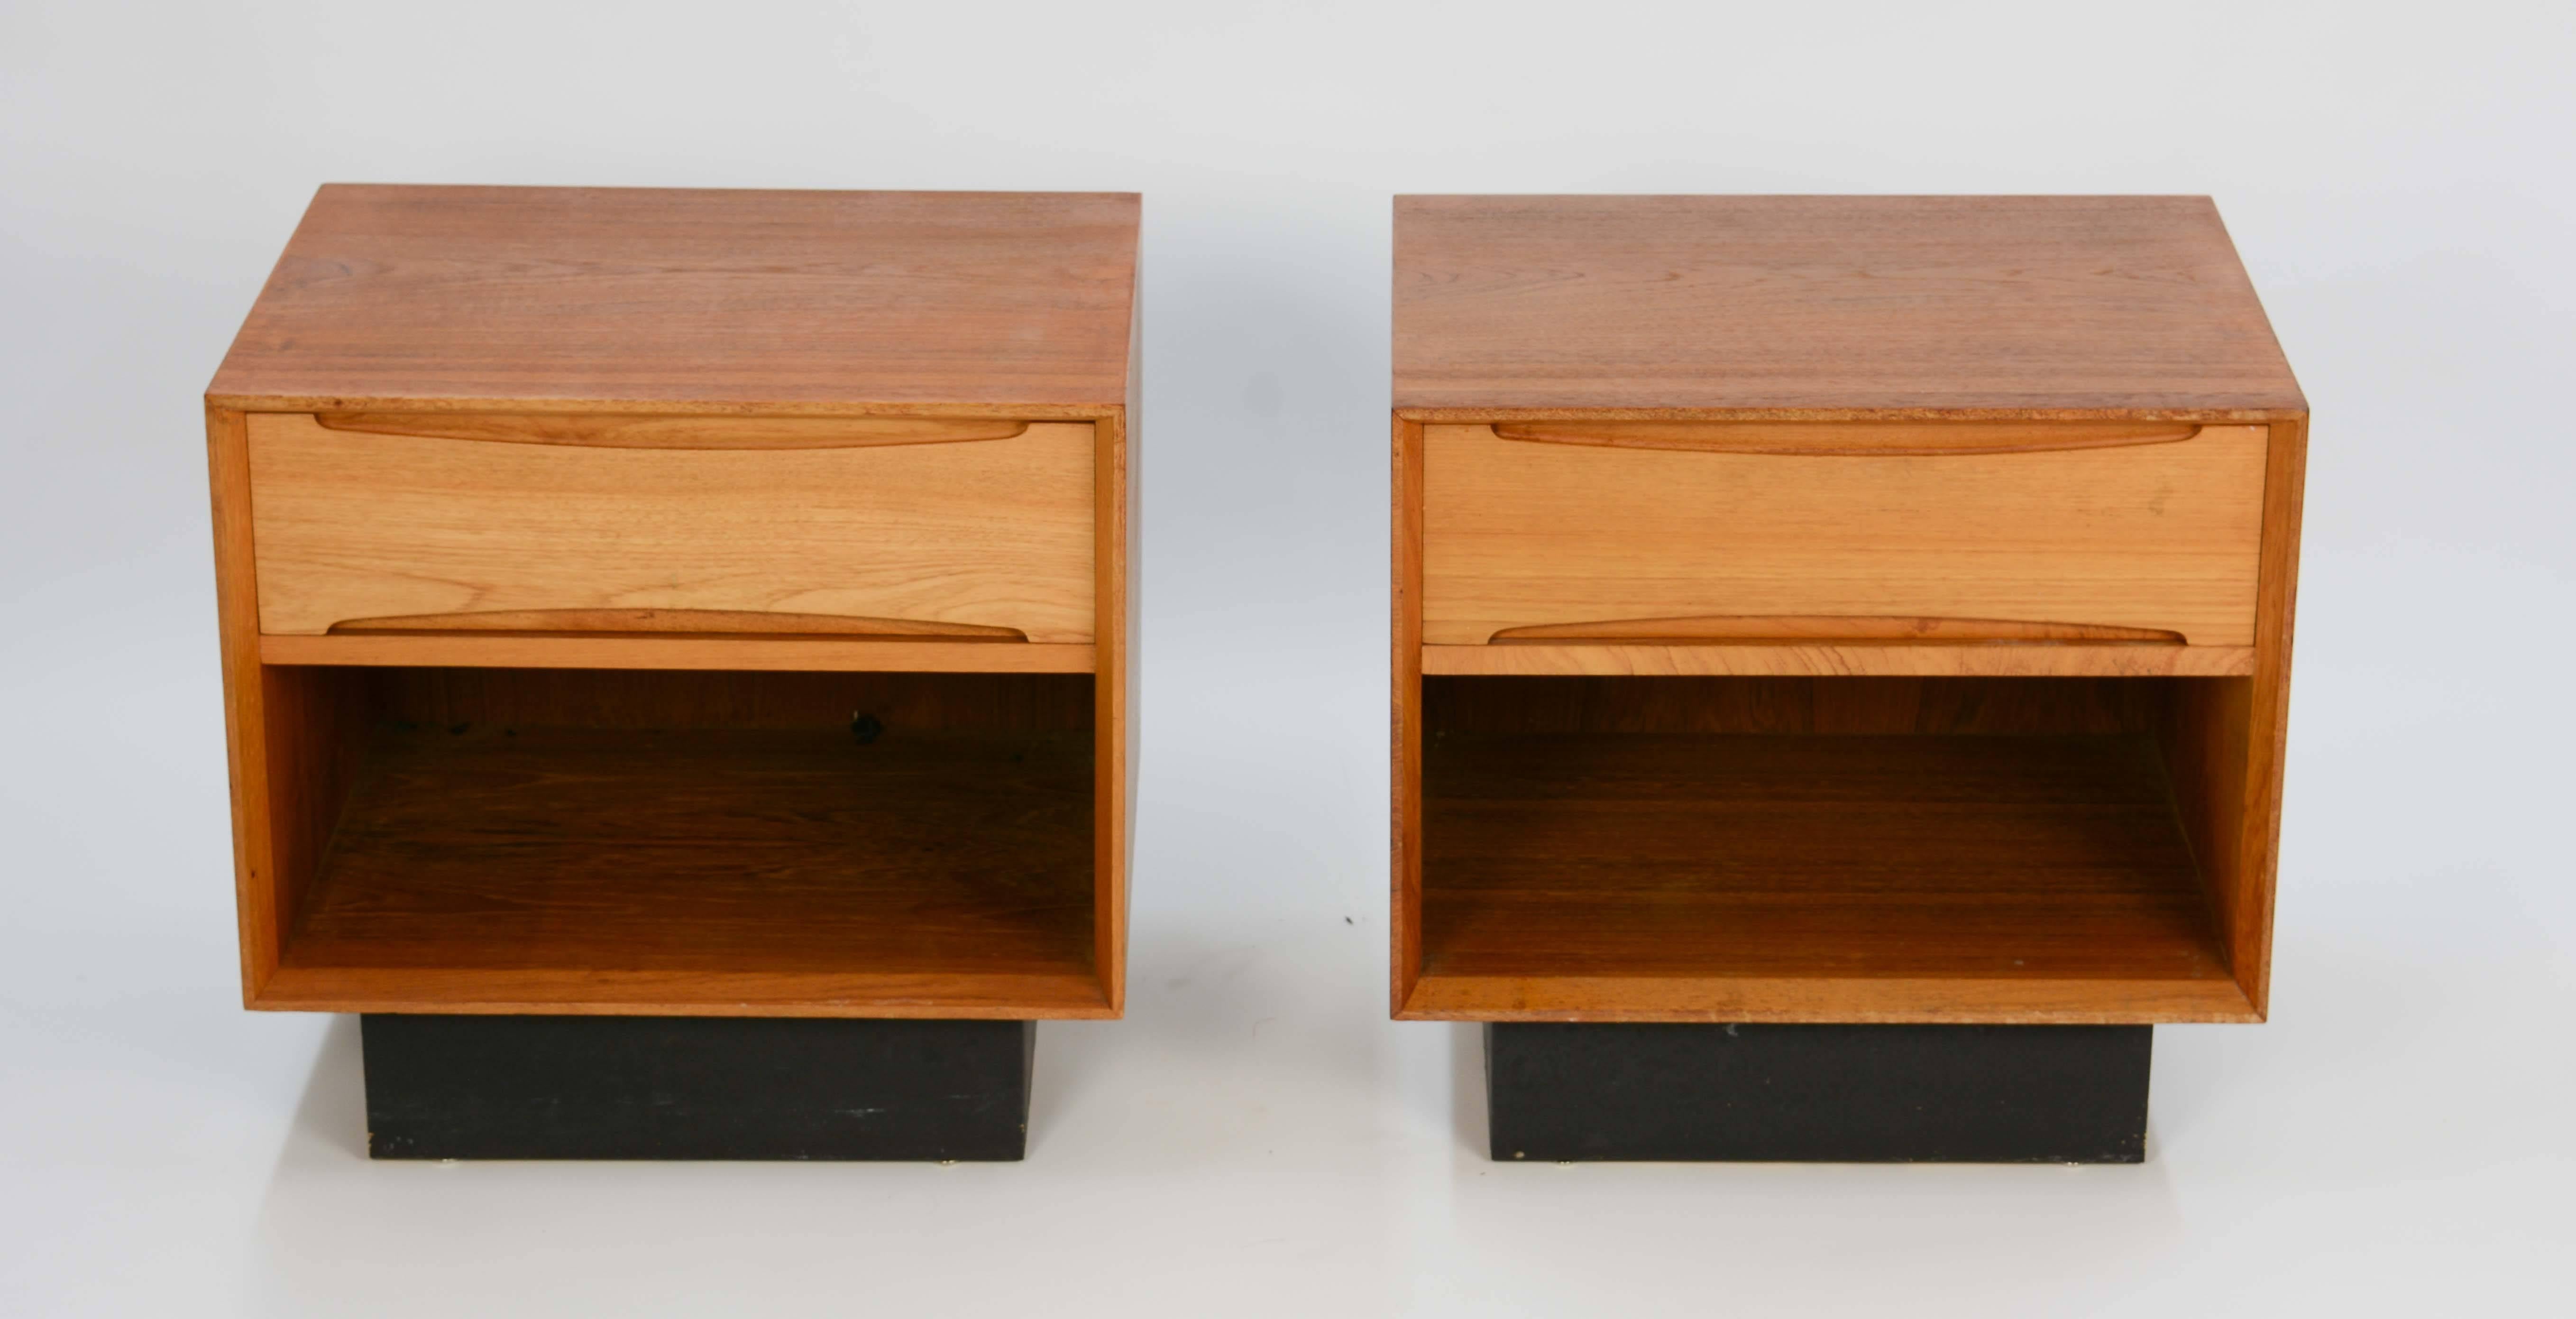 A wonderful pair of Drylund nightstands from Denmark. They are free floating pieces because the backs are finished.